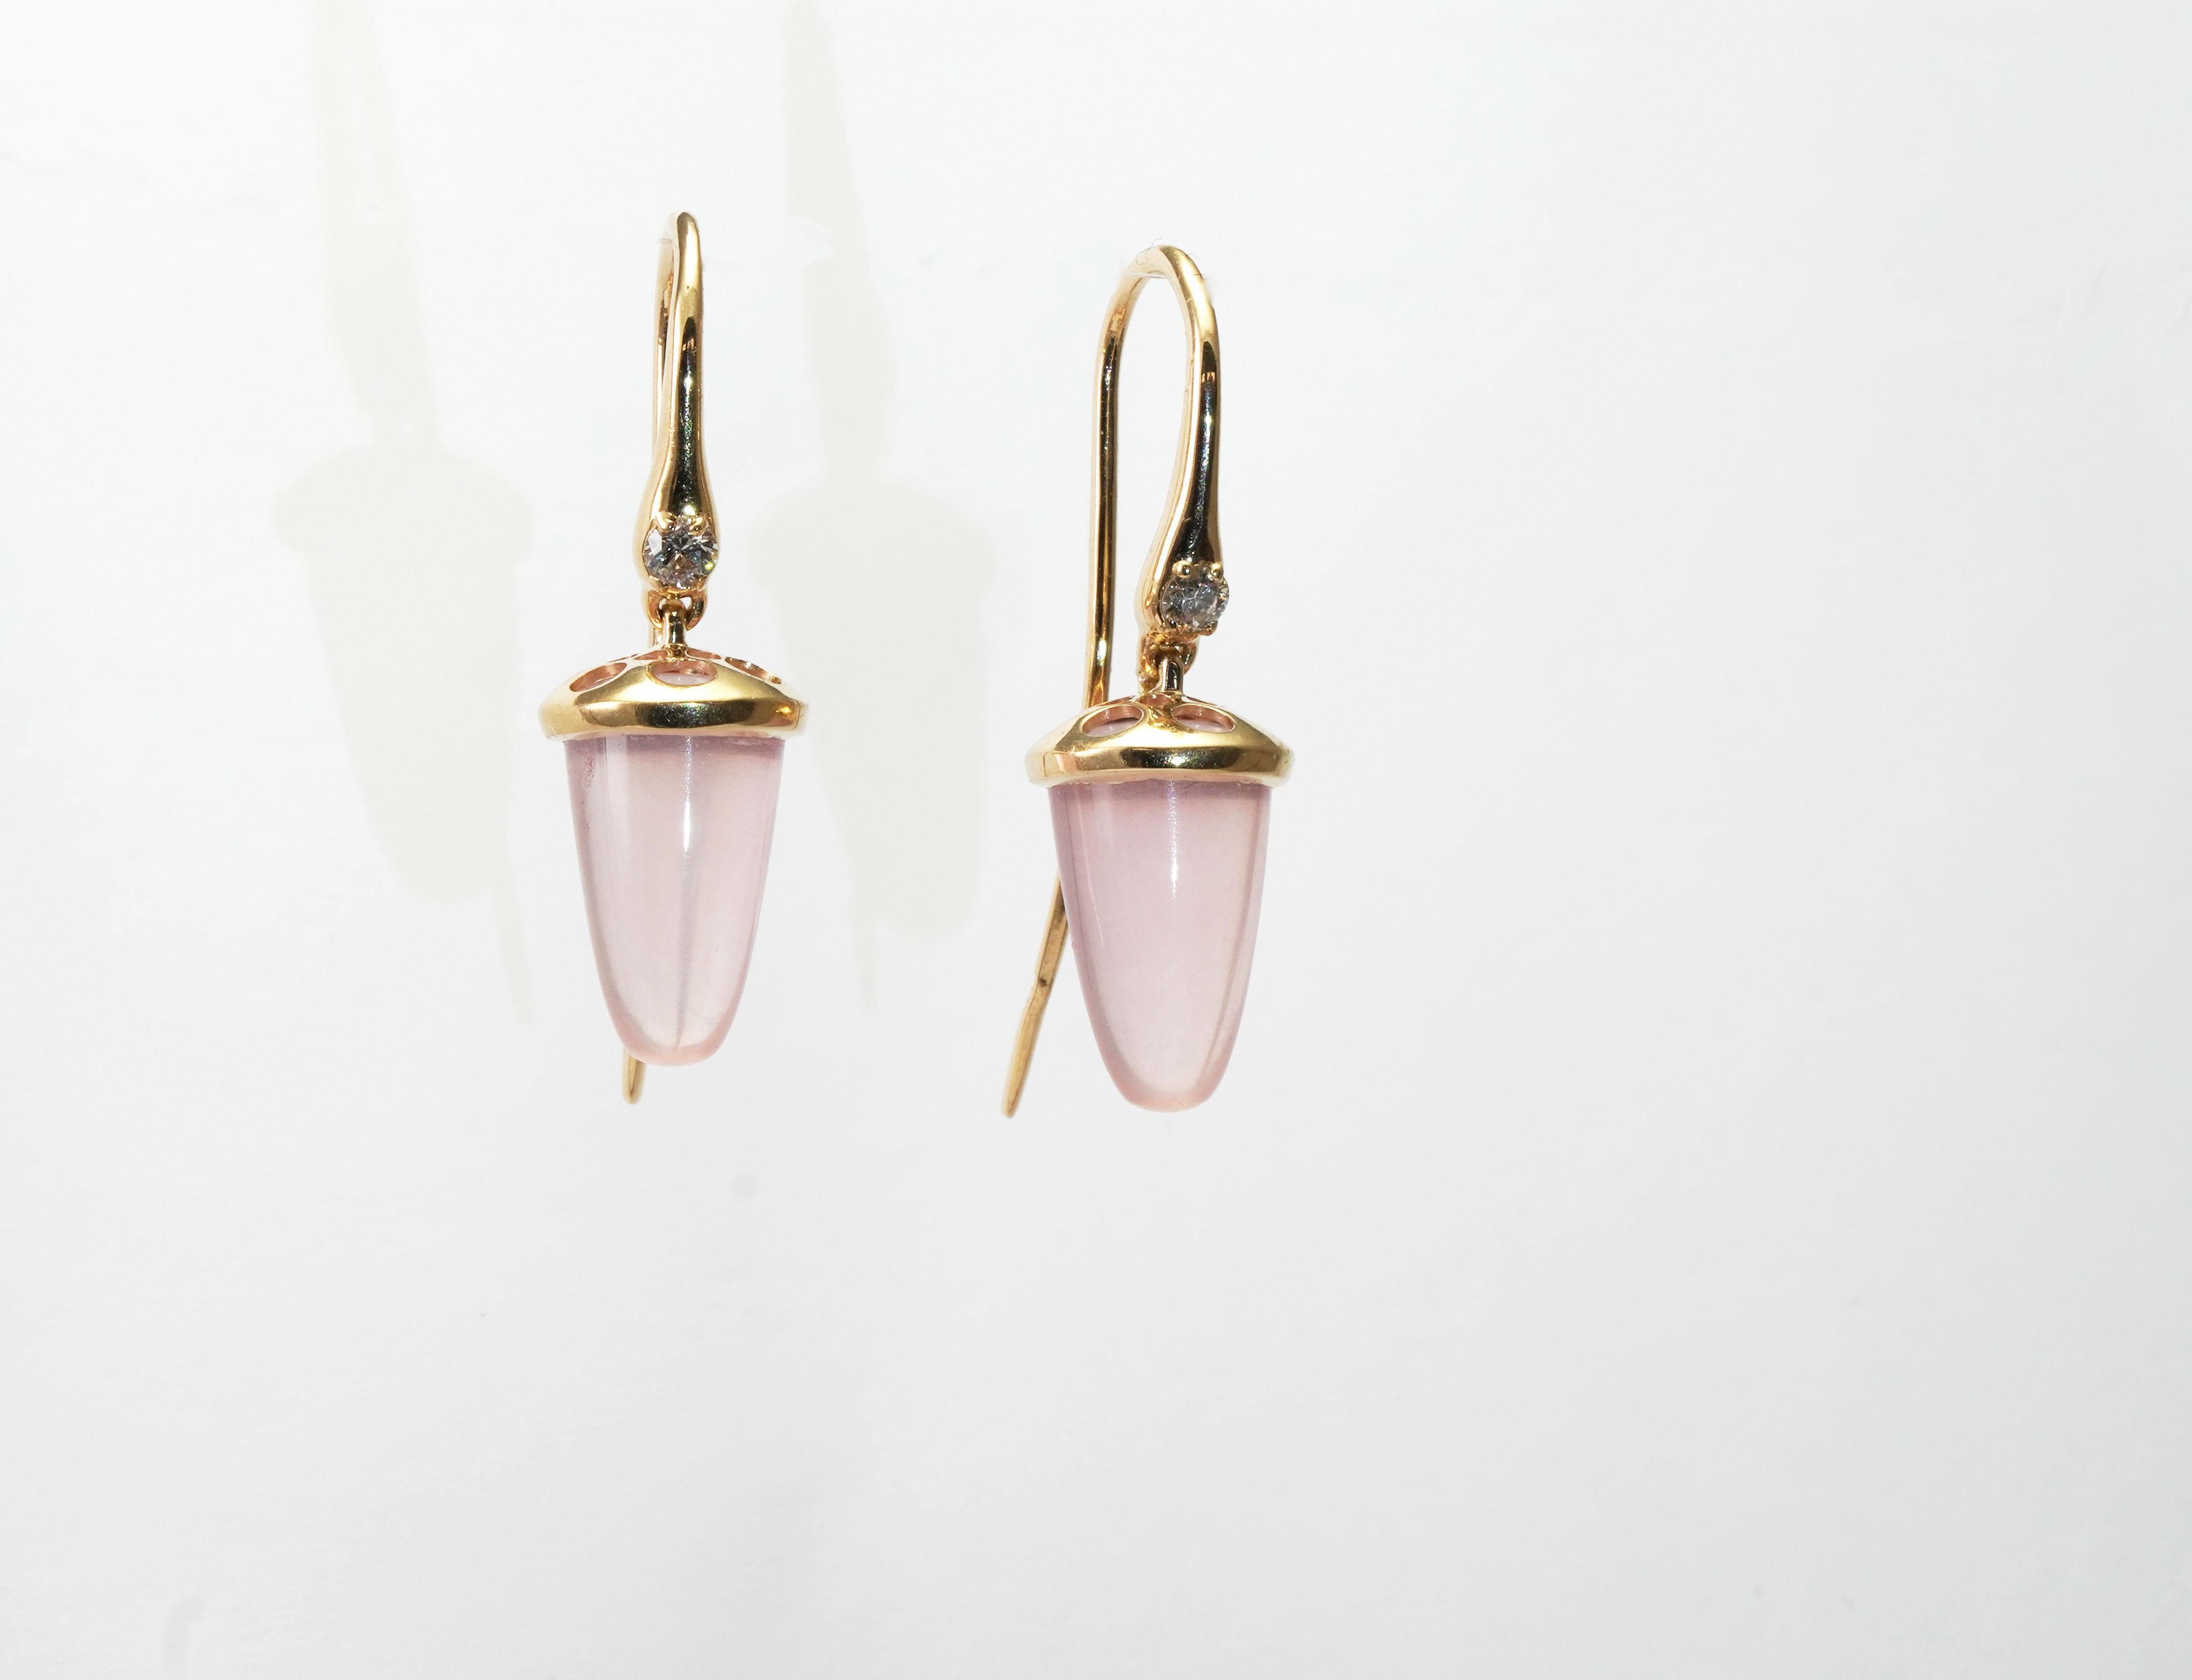 14 kt gold pair of earrings with diamonds and Rose Quartz
Gold color: Yellow
Total weight: 4.43 grams

Set with:
- Rose Quartz
Cut: Cabochon
Colour: Rose

- 2 diamonds in total: 0.08 ct
Cut: Brilliant
Colour / Clarity: G / VS 